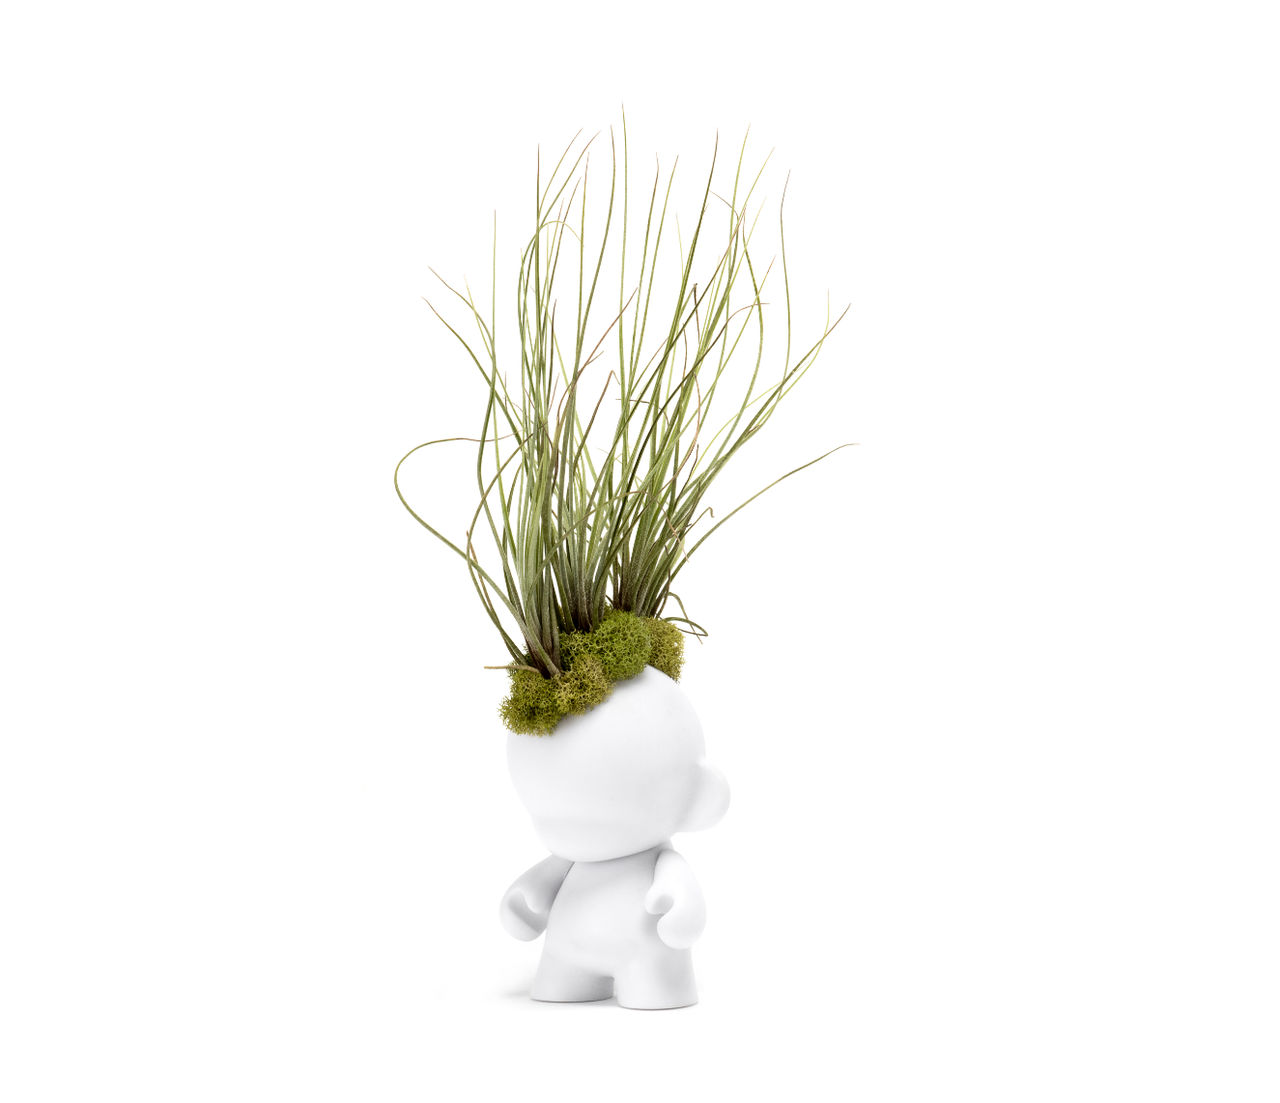 Munny Small Mohawk - Small Juncea Airplants (14" H x 5" W)